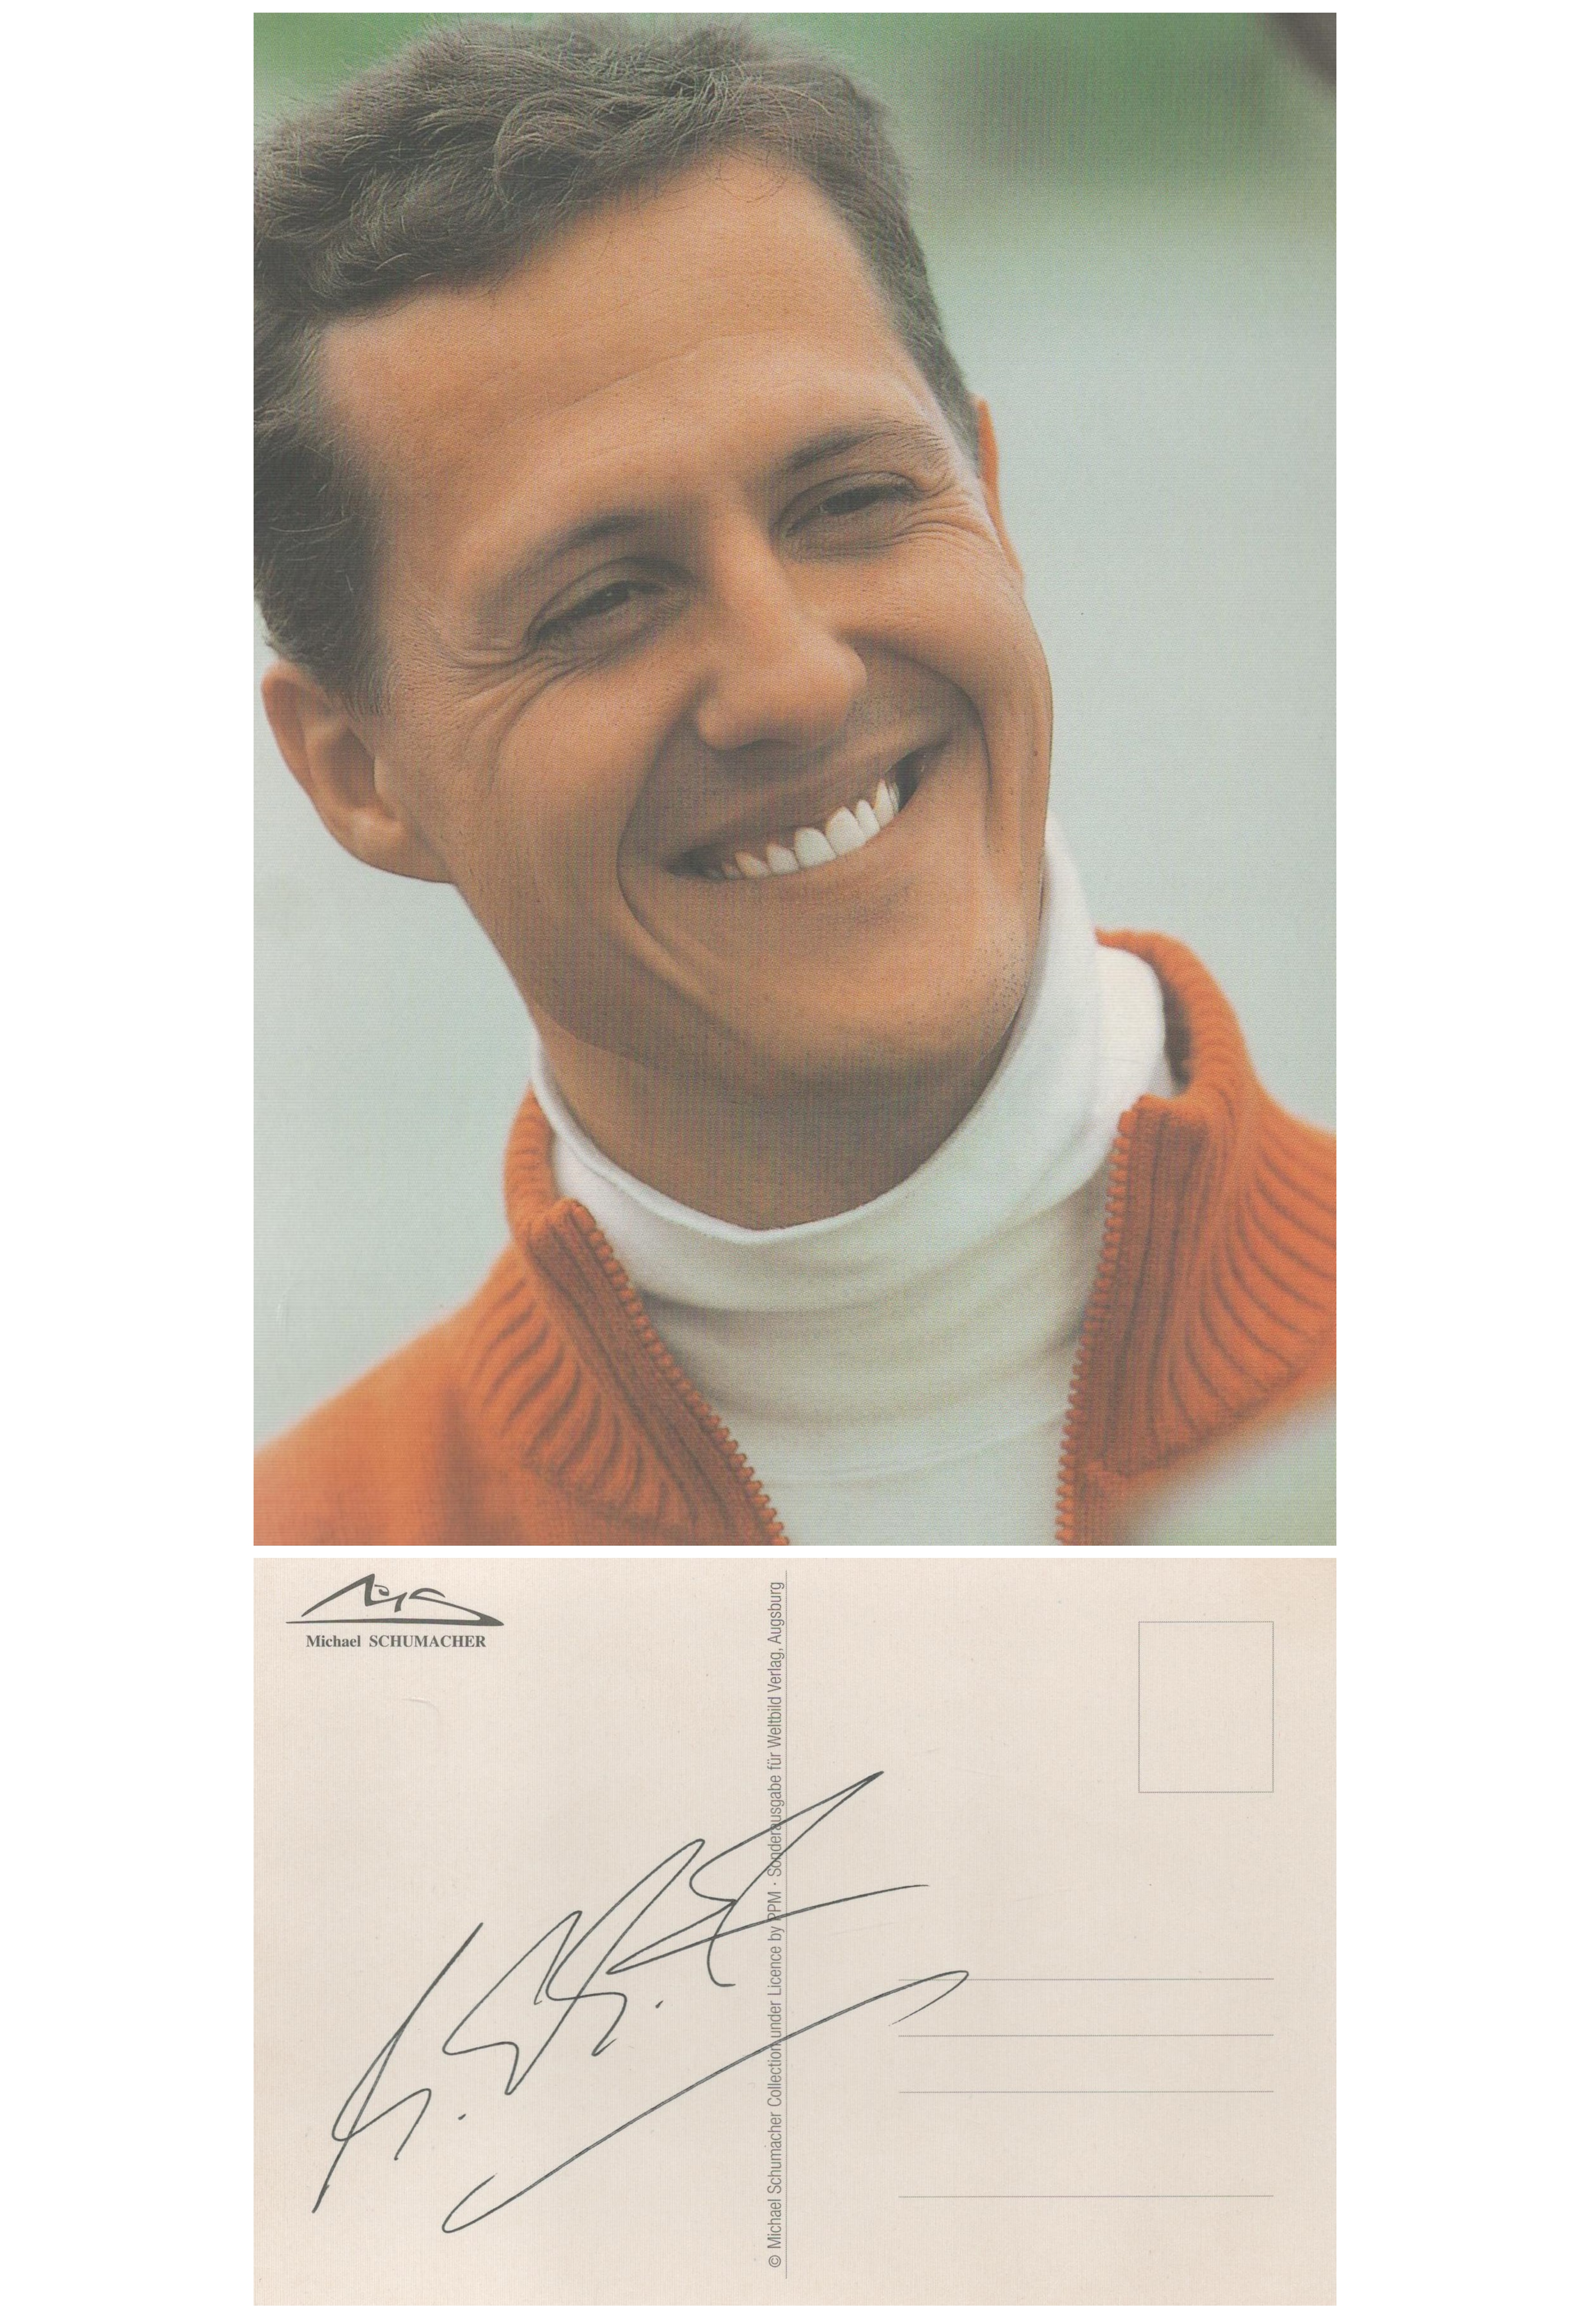 Michael Schumacher signed 6x4 inch colour post card photo signature on reverse side. Good Condition.